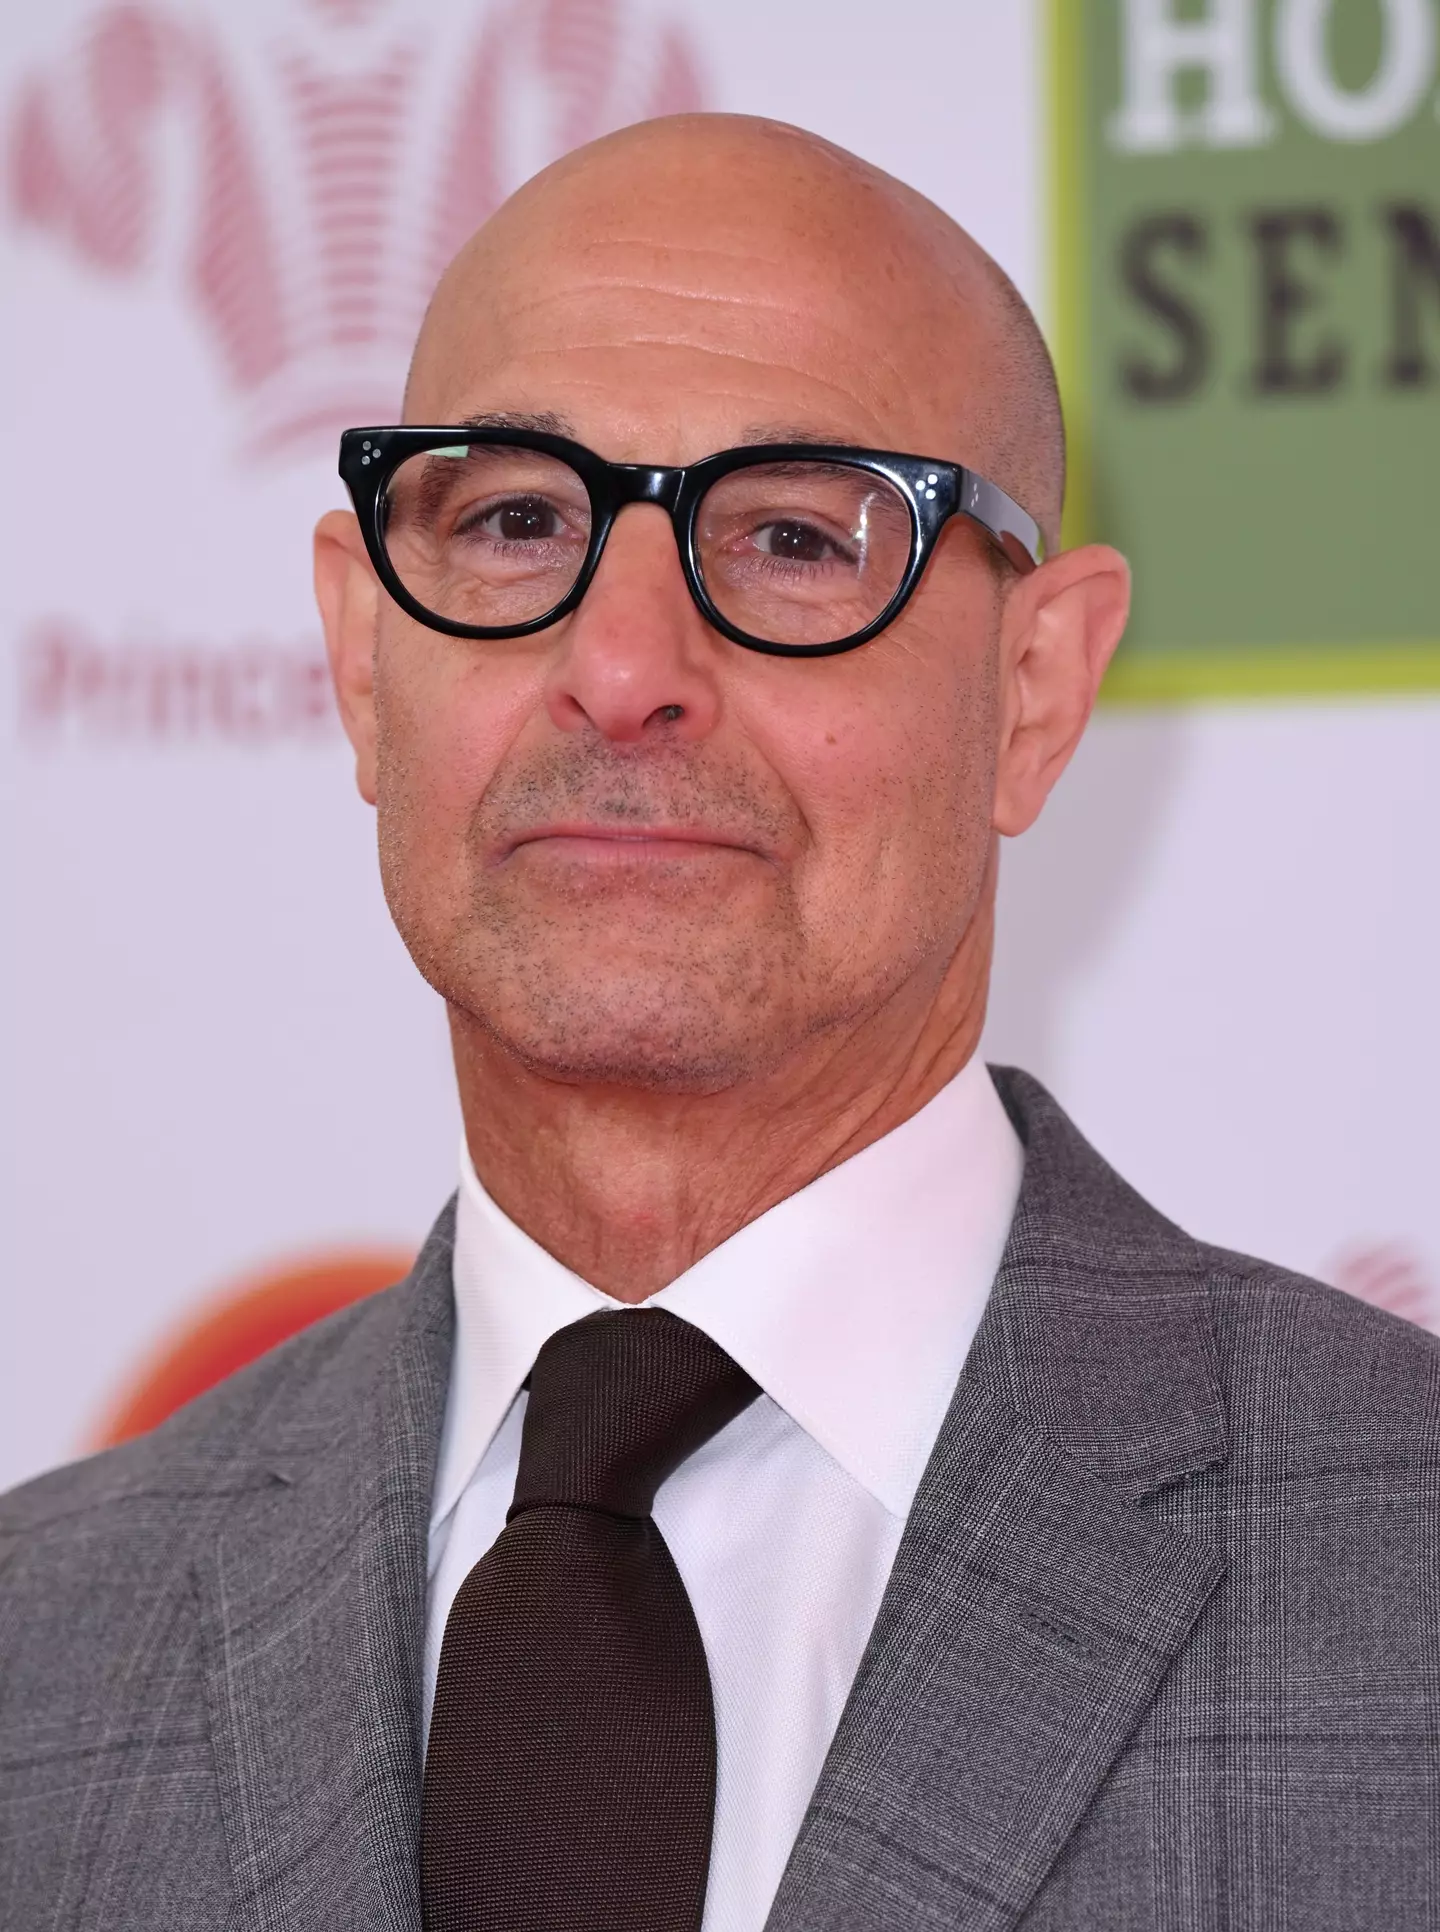 Stanley Tucci lost his wife Kate Spath-Tucci to breast cancer in 2009.